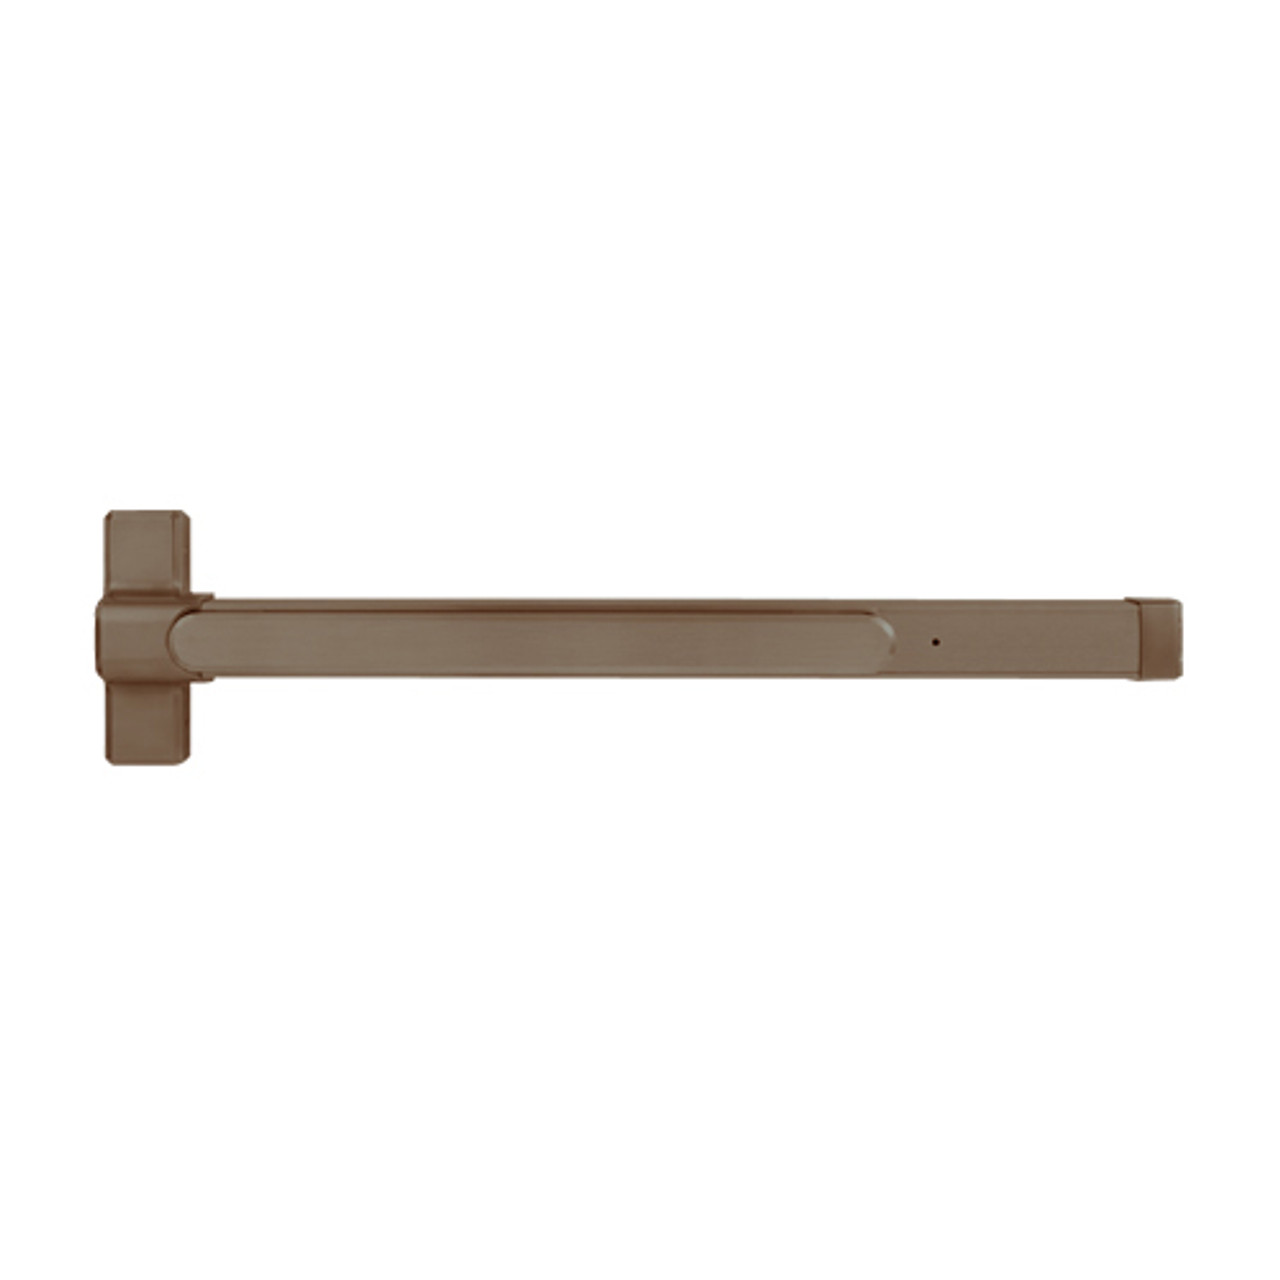 QED127LRX-36-7-313AN Stanley QED100 Series Heavy Duty Concealed Vertical Rod Hex Dog Exit Device in Anodized Duranodic Bronze Finish